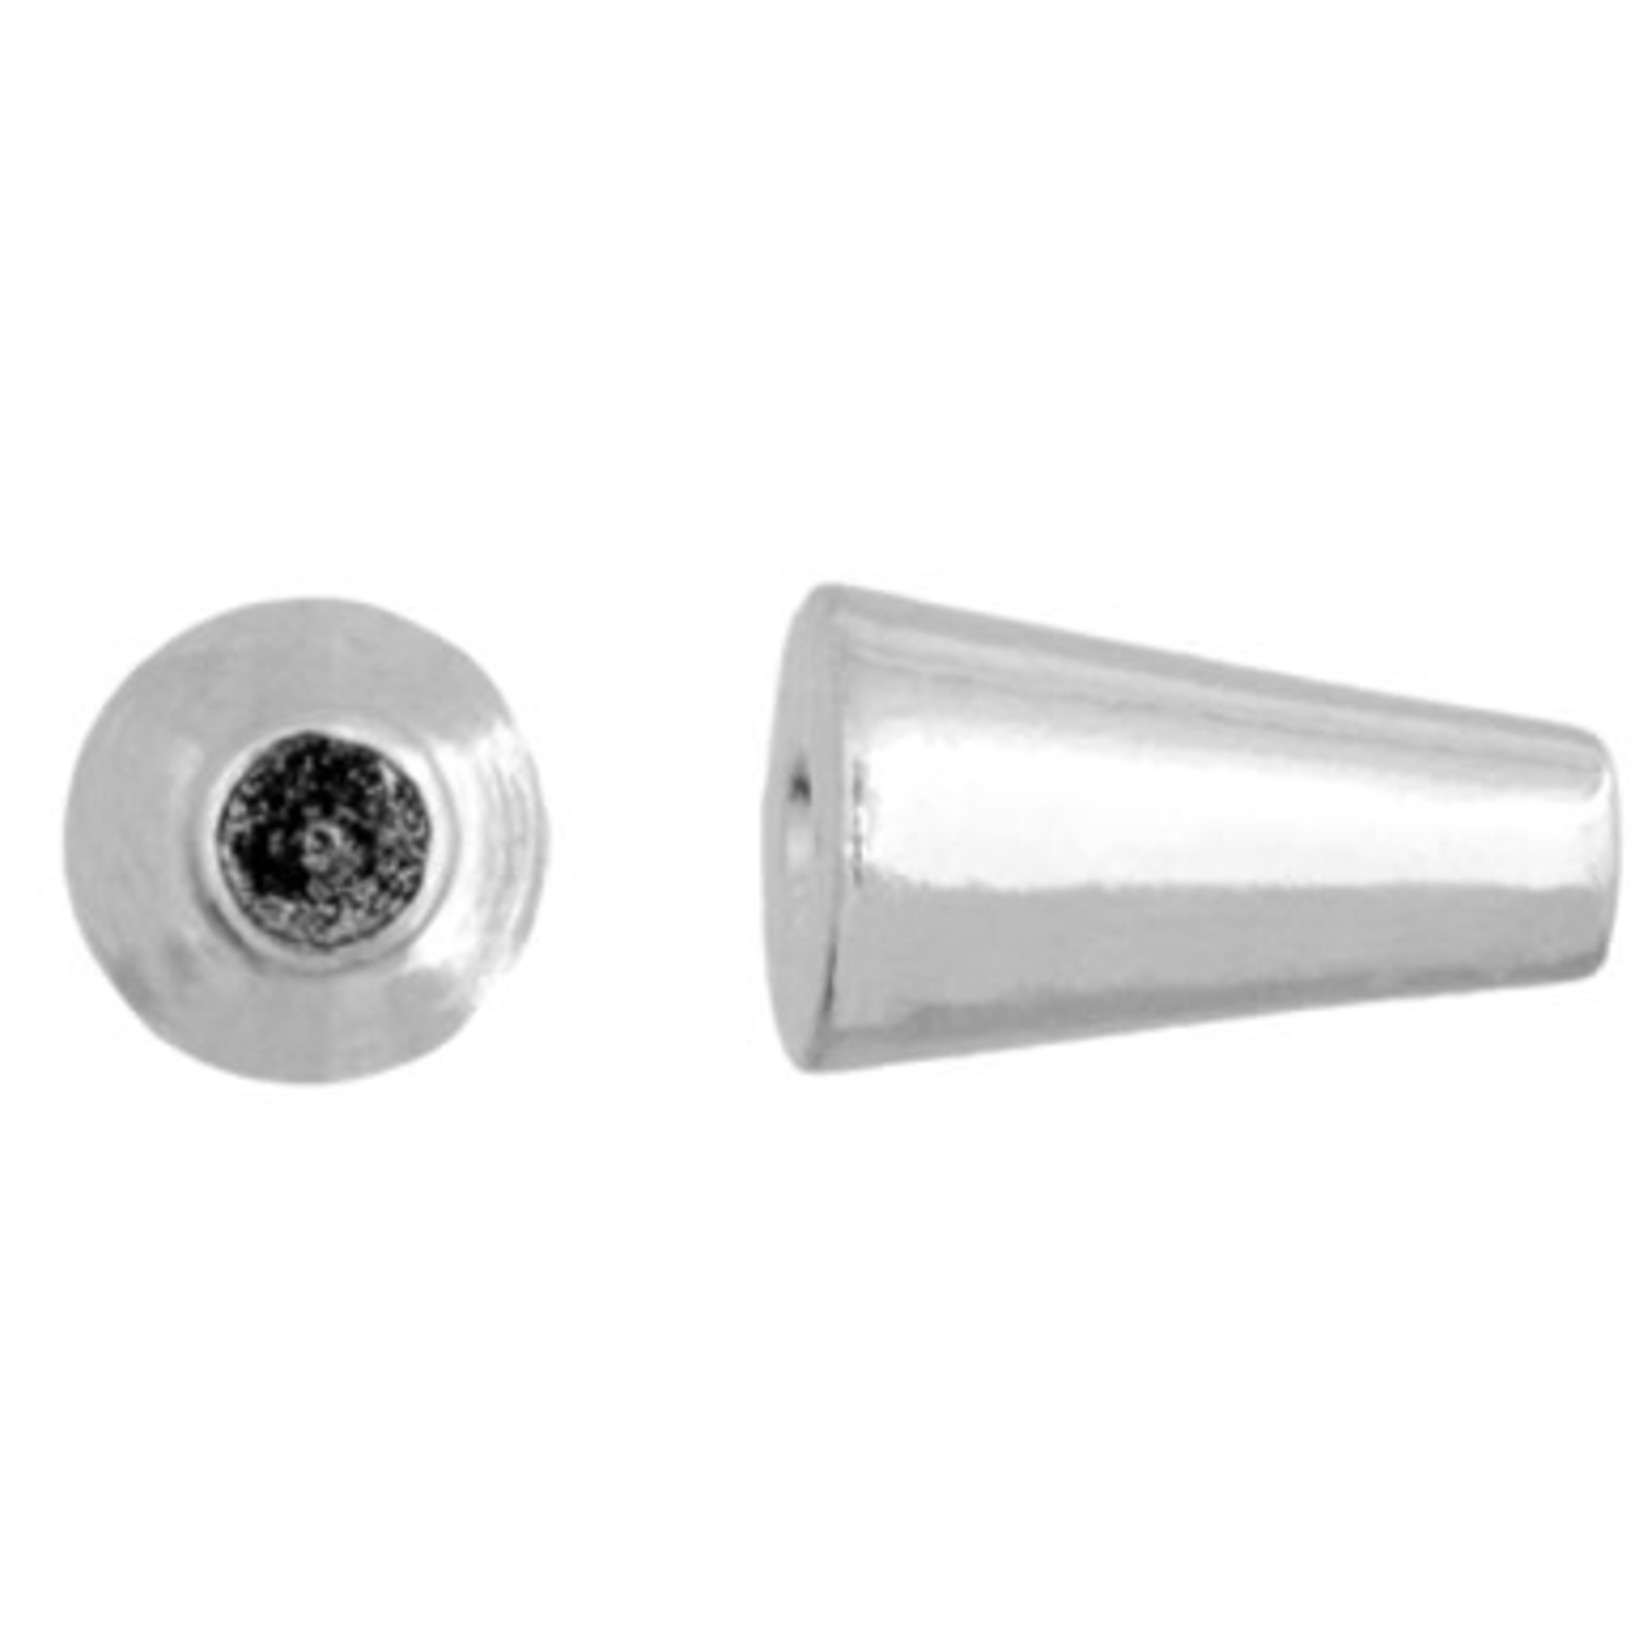 MEMORY WIRE END CAPS - WHITE - 6.5MM - 6PK